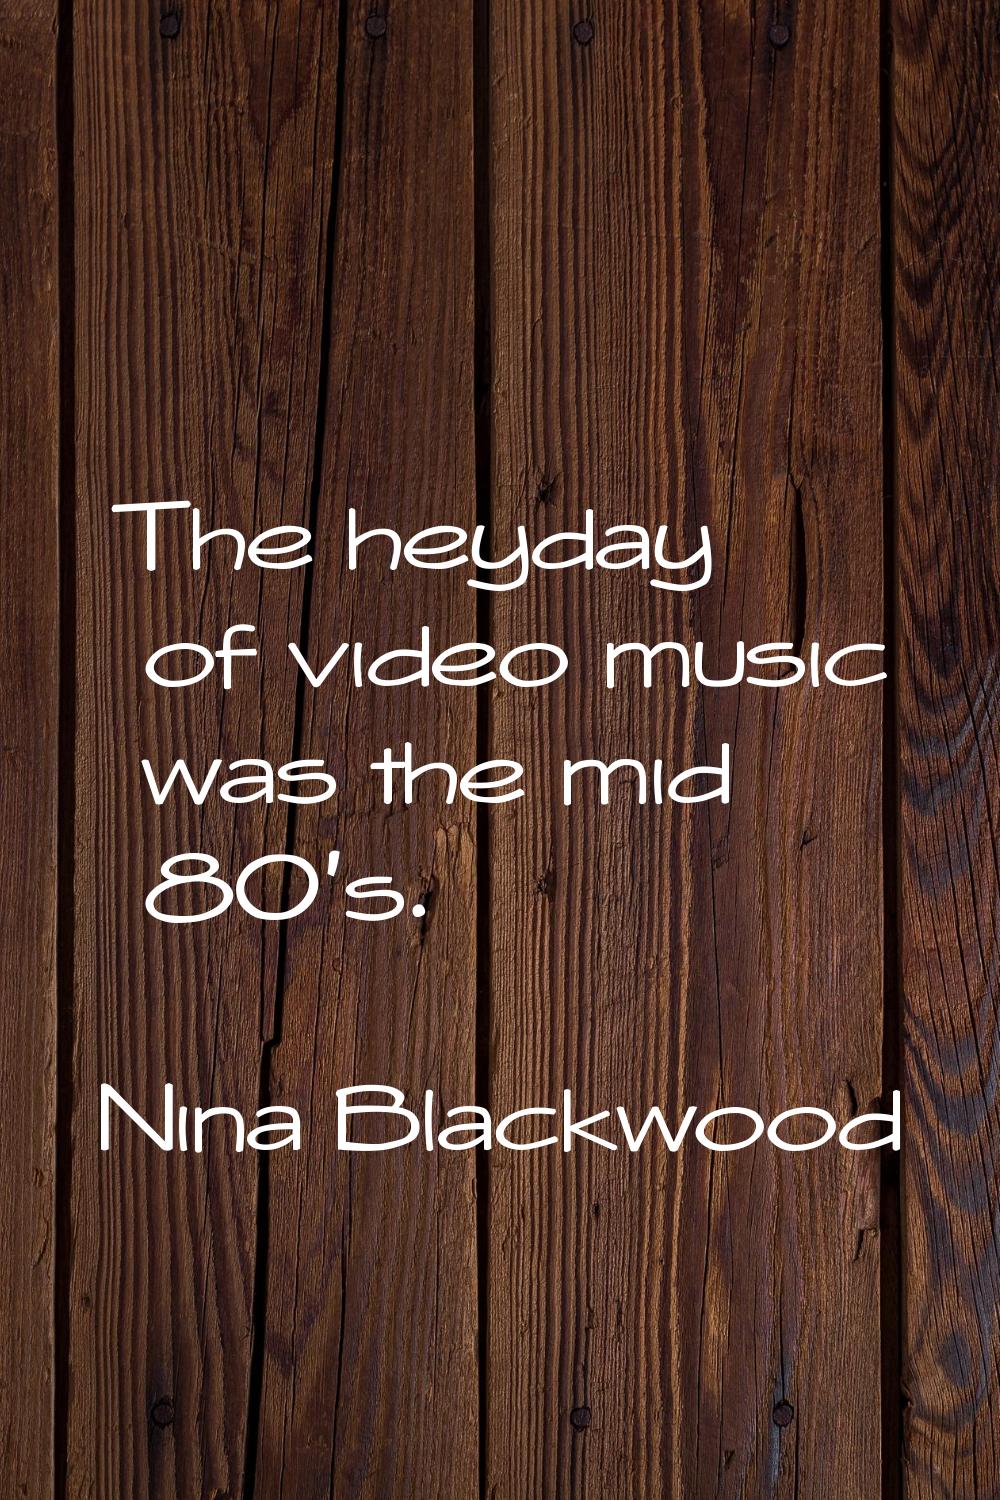 The heyday of video music was the mid 80's.